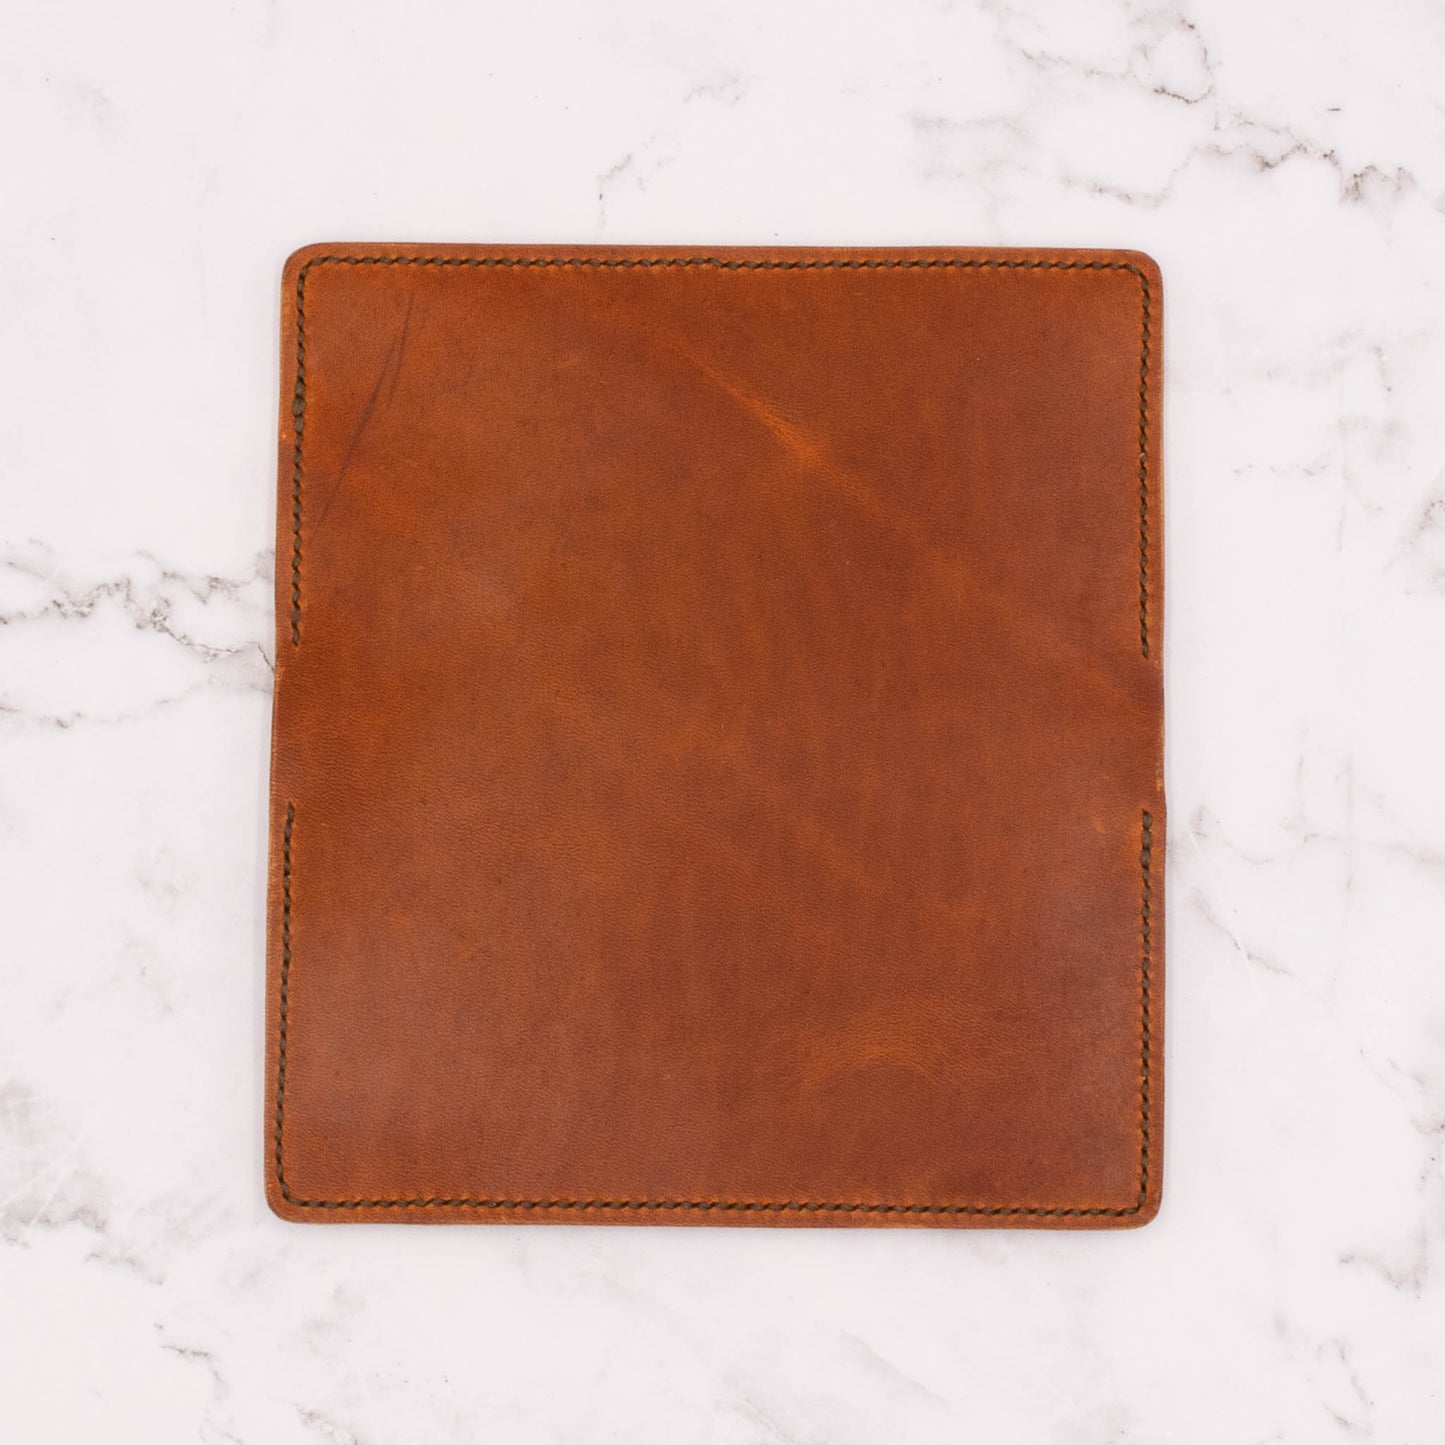 Handcrafted Leather Checkbook Cover - English Tan